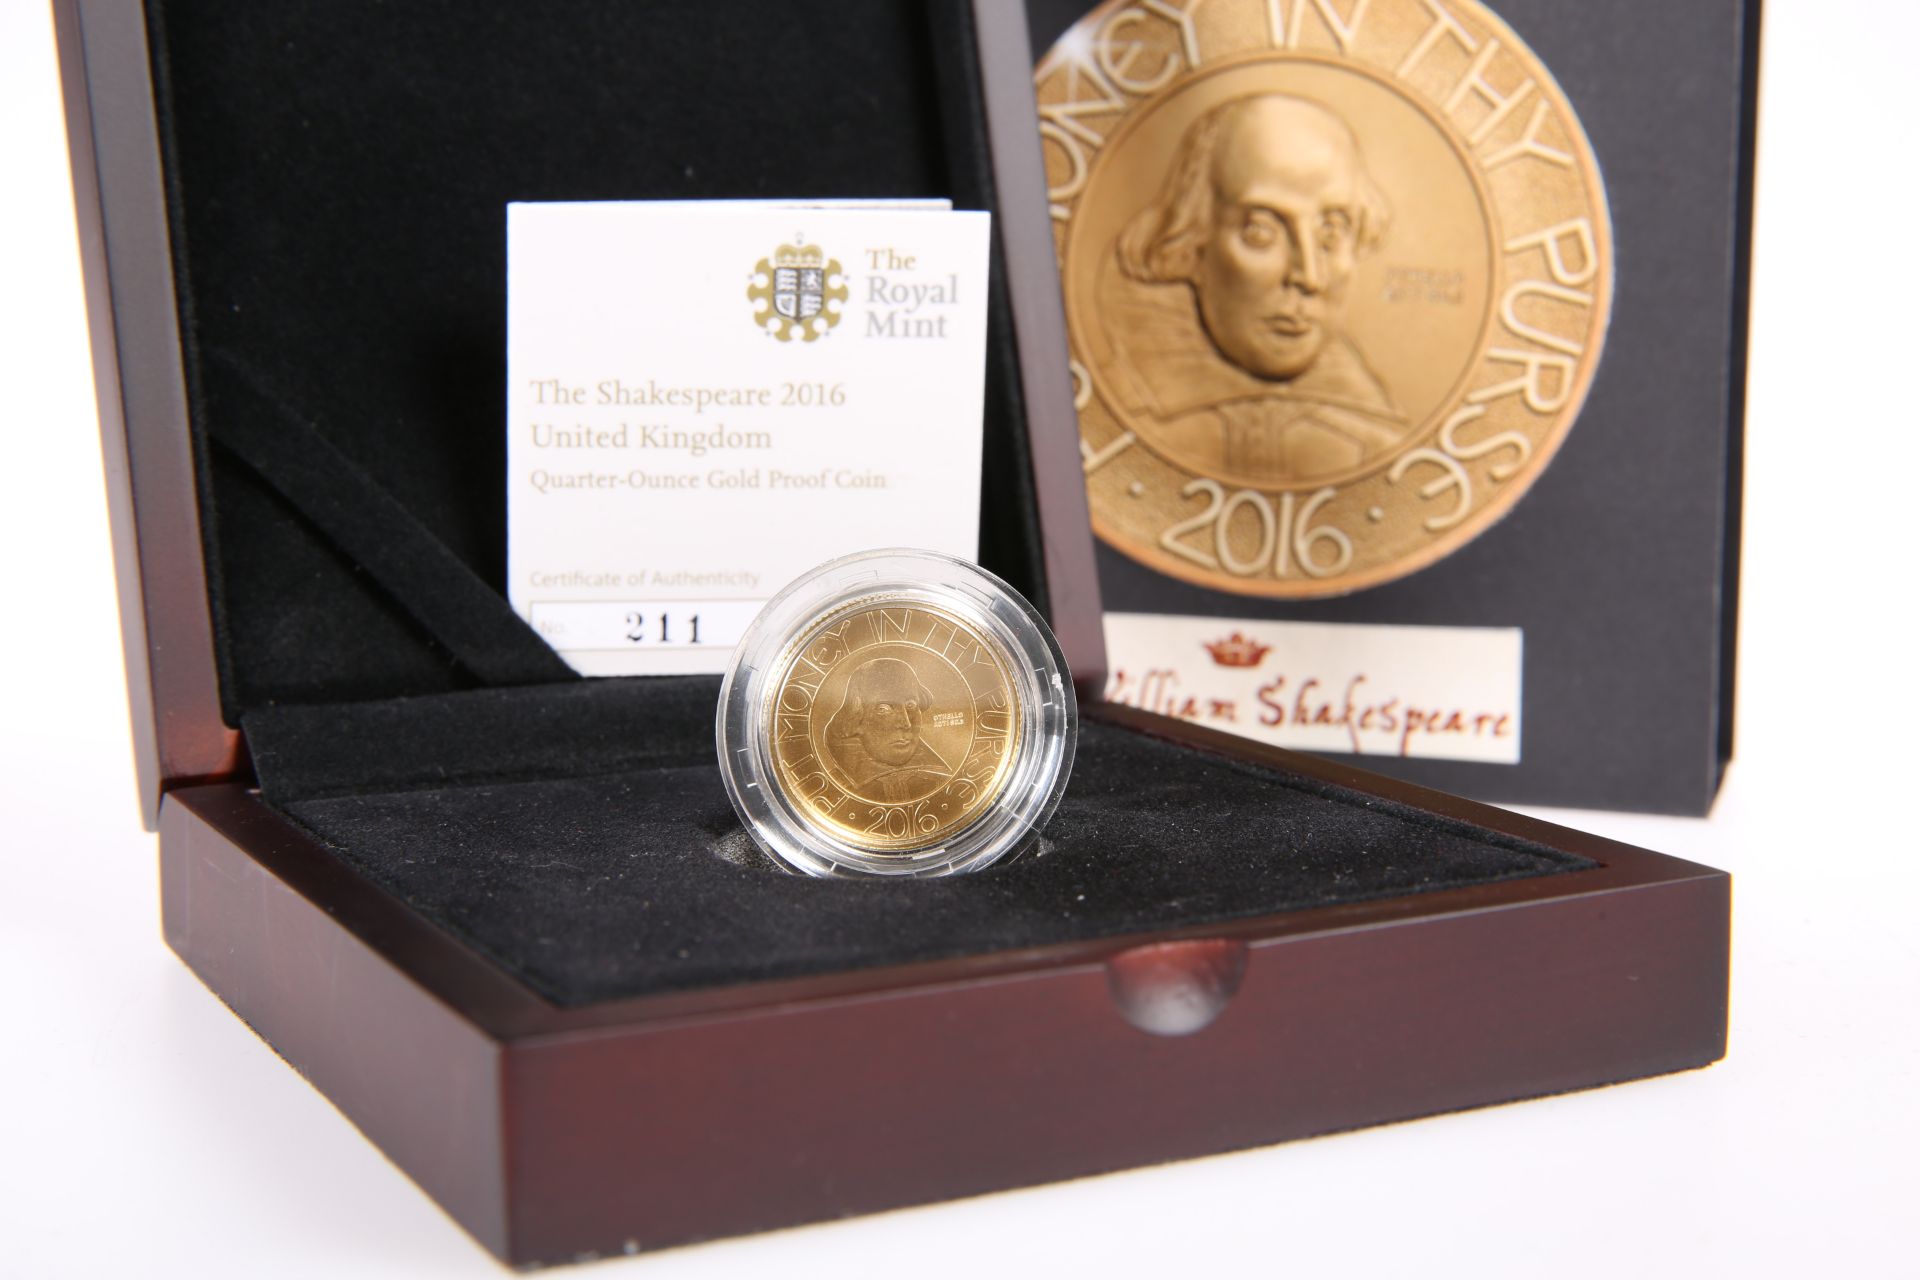 A ROYAL MINT QUARTER-OUNCE GOLD PROOF COIN, "THE SHAKESPEARE 2016", boxed with COA no. 211 - Bild 2 aus 2